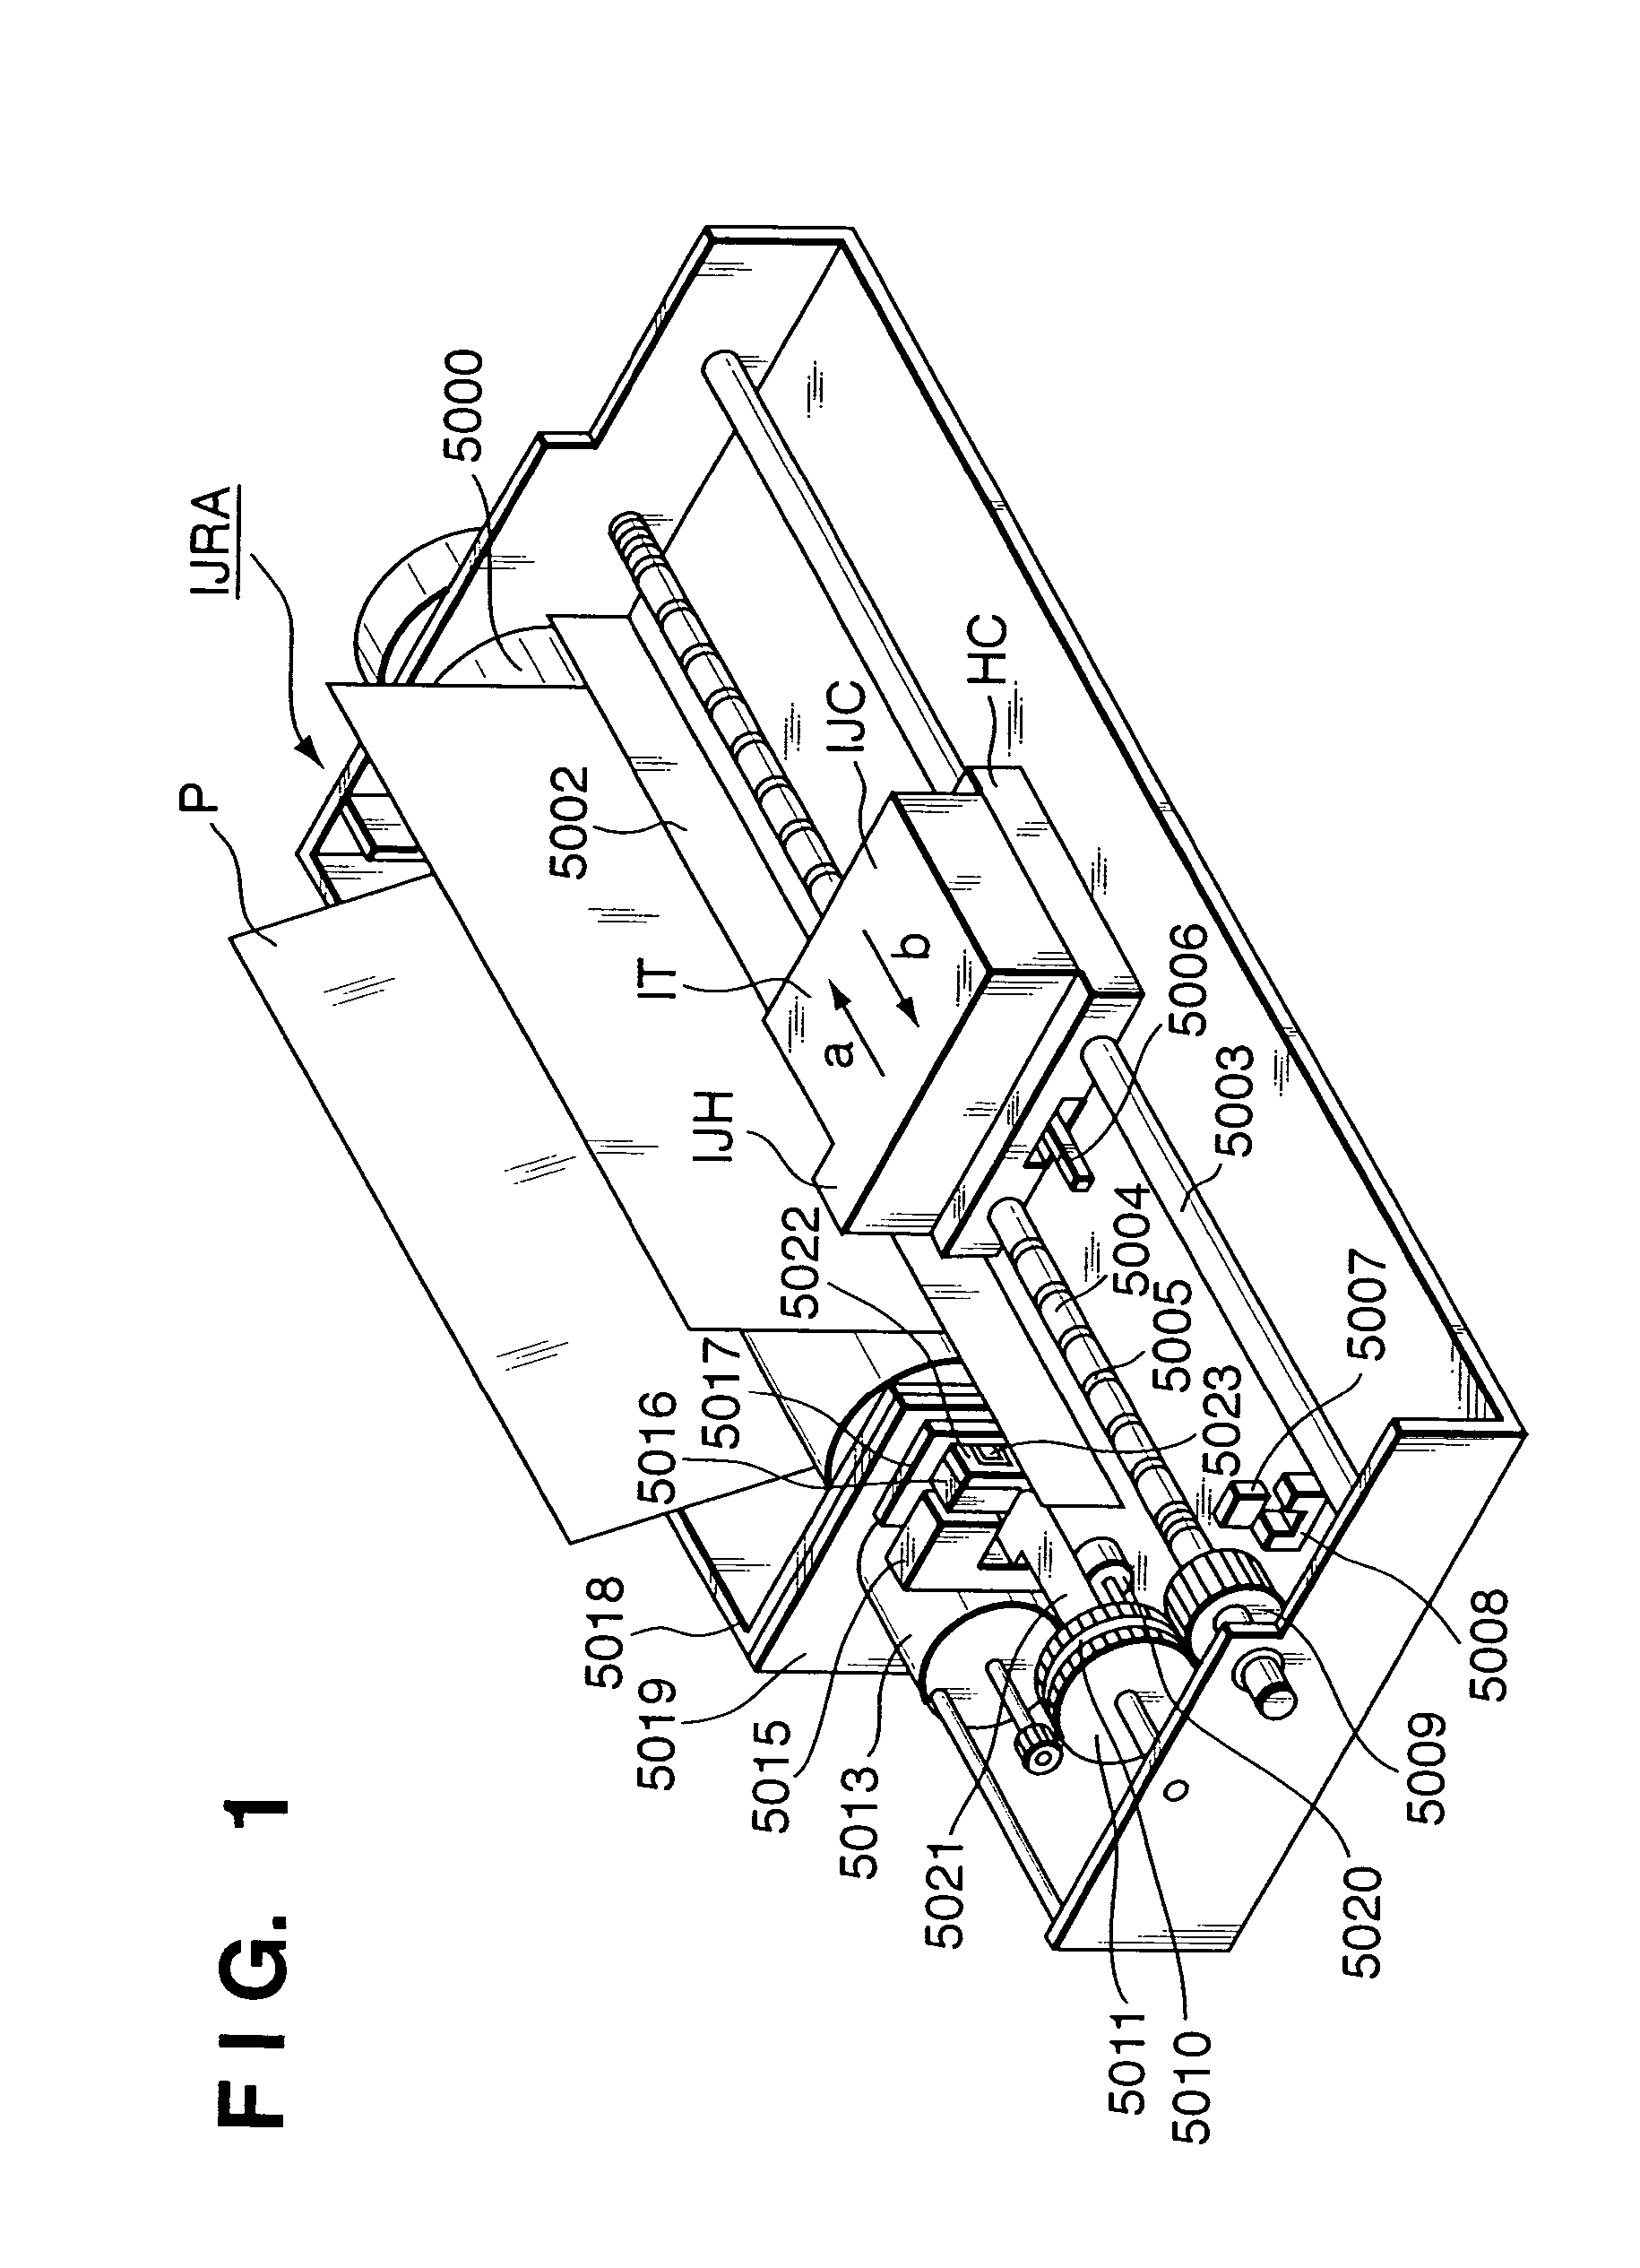 Ink-jet printing apparatus and preliminary discharge control method for the apparatus